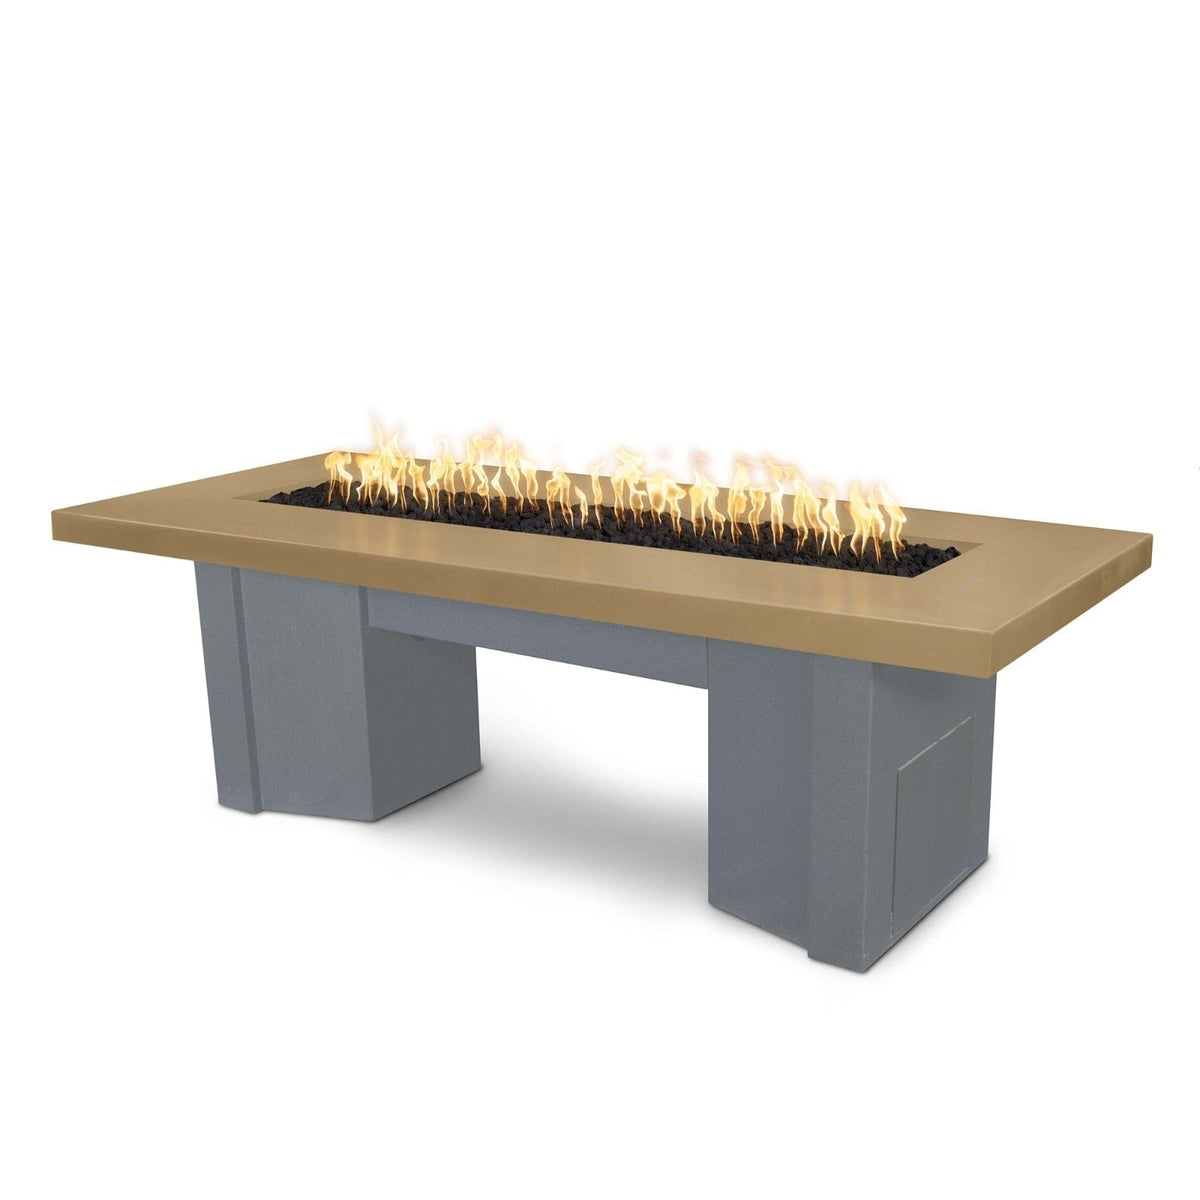 The Outdoor Plus Fire Features Brown (-BRN) / Gray Powder Coated Steel (-GRY) The Outdoor Plus 78&quot; Alameda Fire Table Smooth Concrete in Liquid Propane - Flame Sense System with Push Button Spark Igniter / OPT-ALMGFRC78FSEN-LP